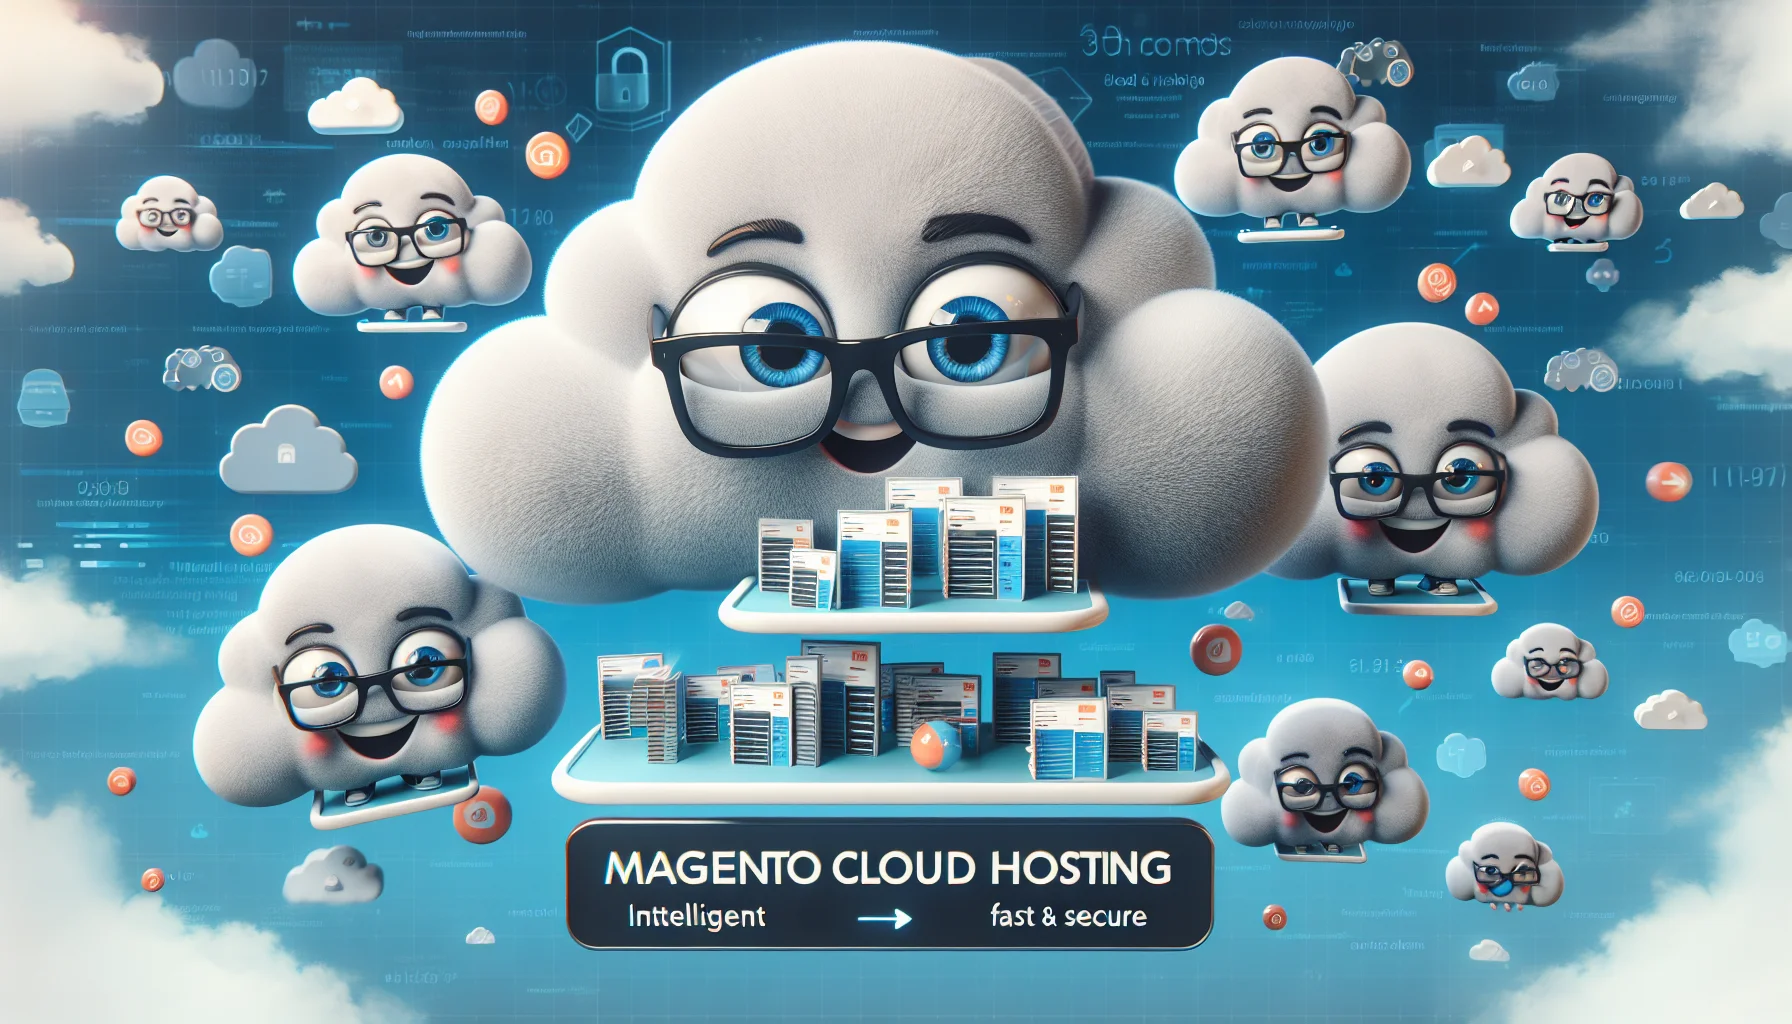 Create a comedic and appealing image of cloud hosting represented by fluffy, white and gray clouds with faces, carrying tiny websites on soft blue bubble-like trays. The main cloud, larger than the others, has glasses and a smile, expressing the intelligent handling of the websites. The clouds are floating amidst a digital sky background, filled with iconic symbols of speed, security, and stability. The bottom portion of the image should display the words 'Magento Cloud Hosting: Intelligent, Fast & Secure' in bold, stylish yet easily readable font.